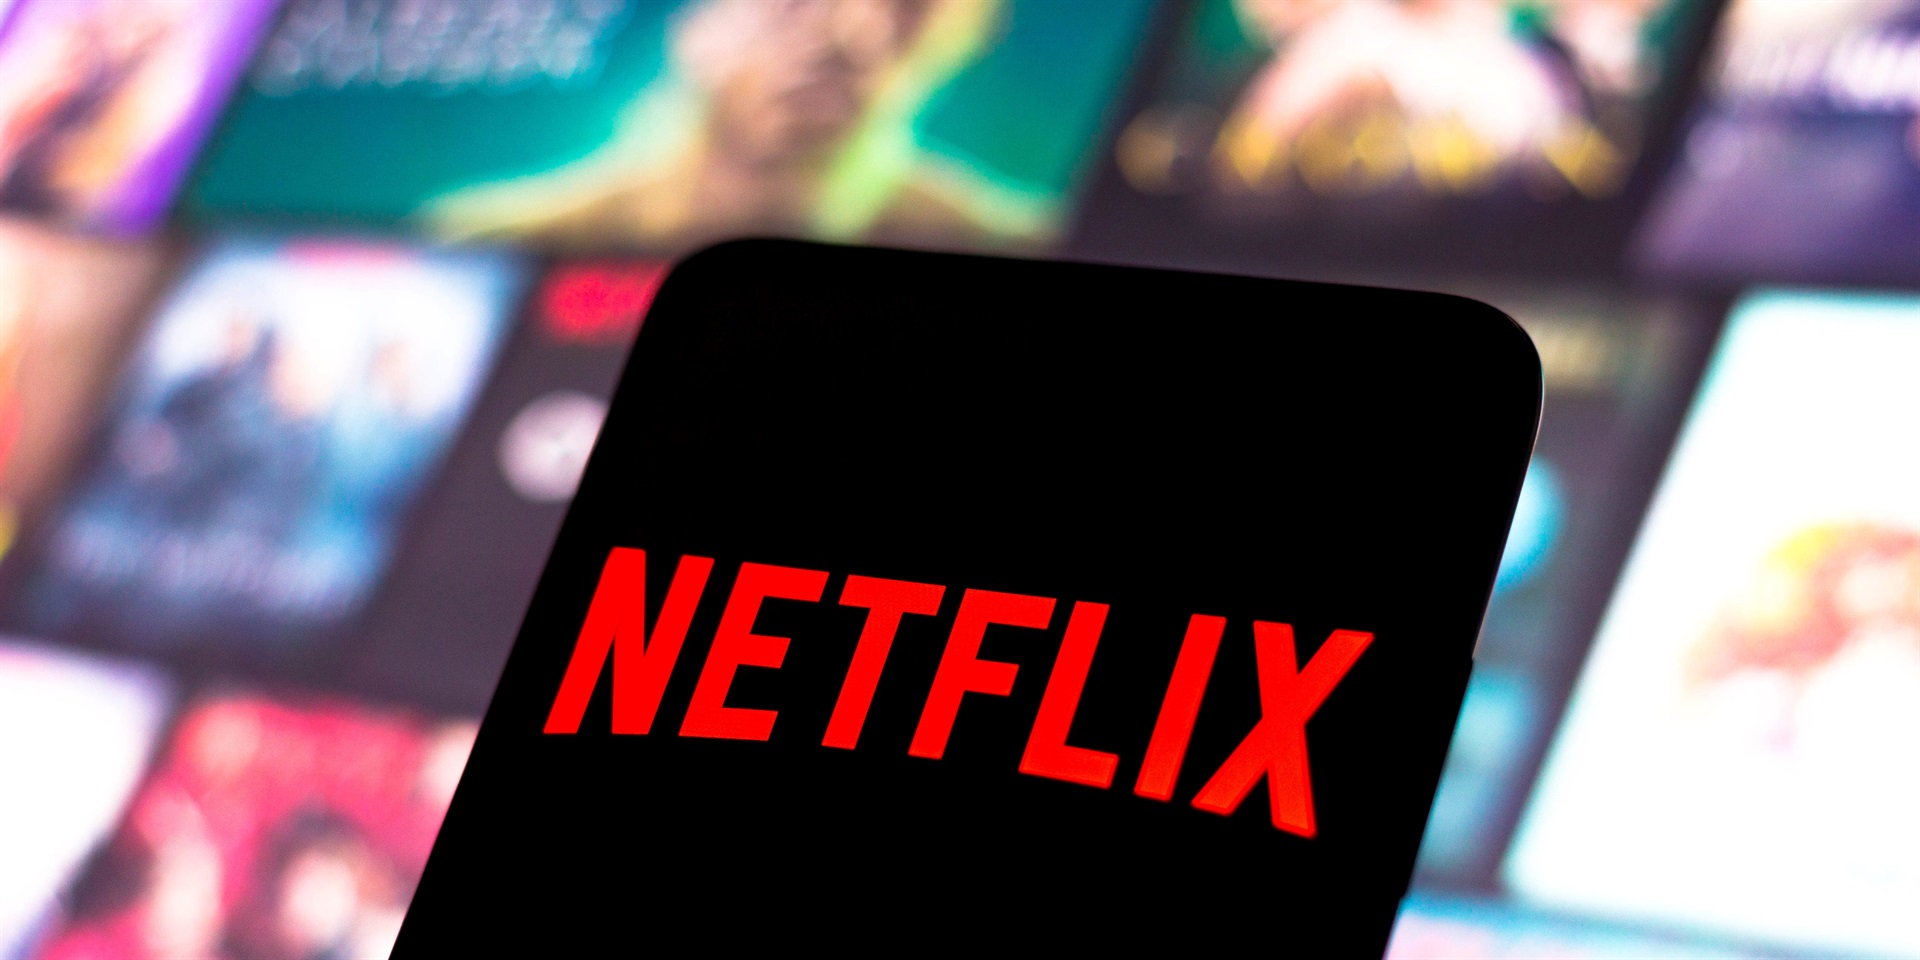 Netflix shed subscribers in the first quarter. Rafael Henrique/SOPA Images/LightRocket via Getty Images